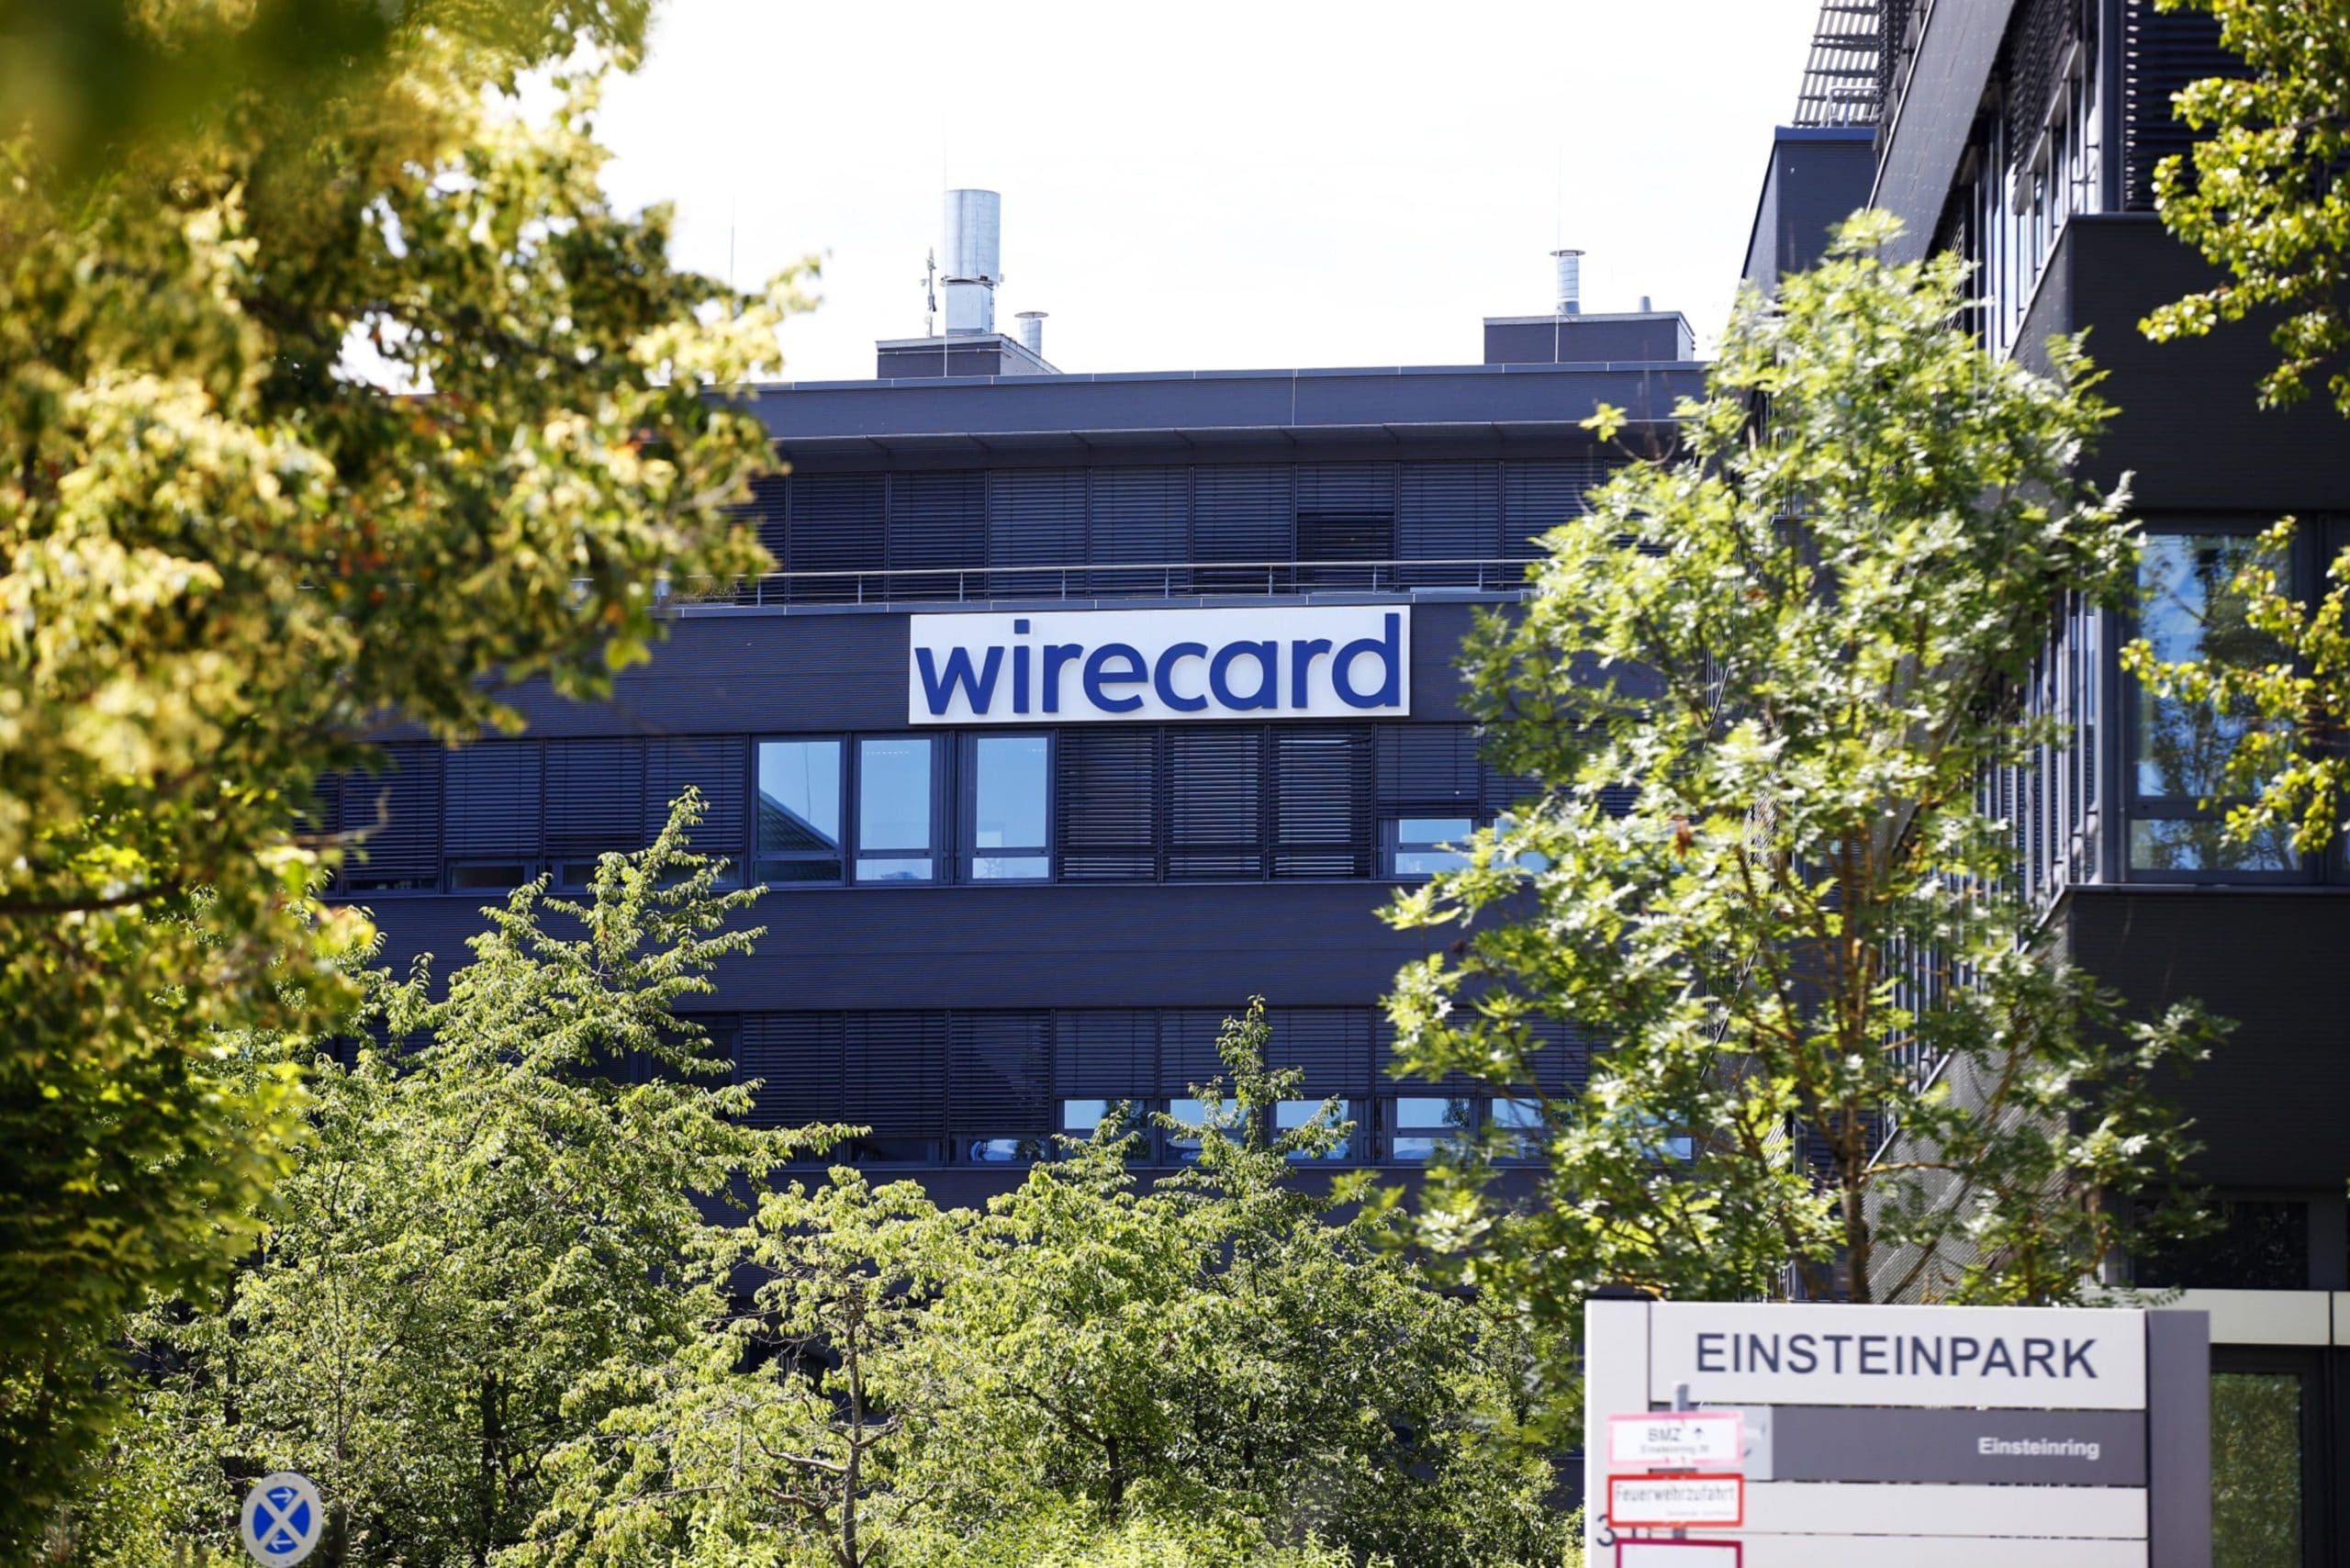 The Wirecard AG logo sits on the company's headquarters during a raid with prosecutors in Munich, Germany, on Wednesday, July 1, 2020. Wirecard offices in Germany and two locations in Austria were raided by Munich prosecutors looking into the 1.9 billion euros ($2.1 billion) that went missing from the fintech companys accounts.